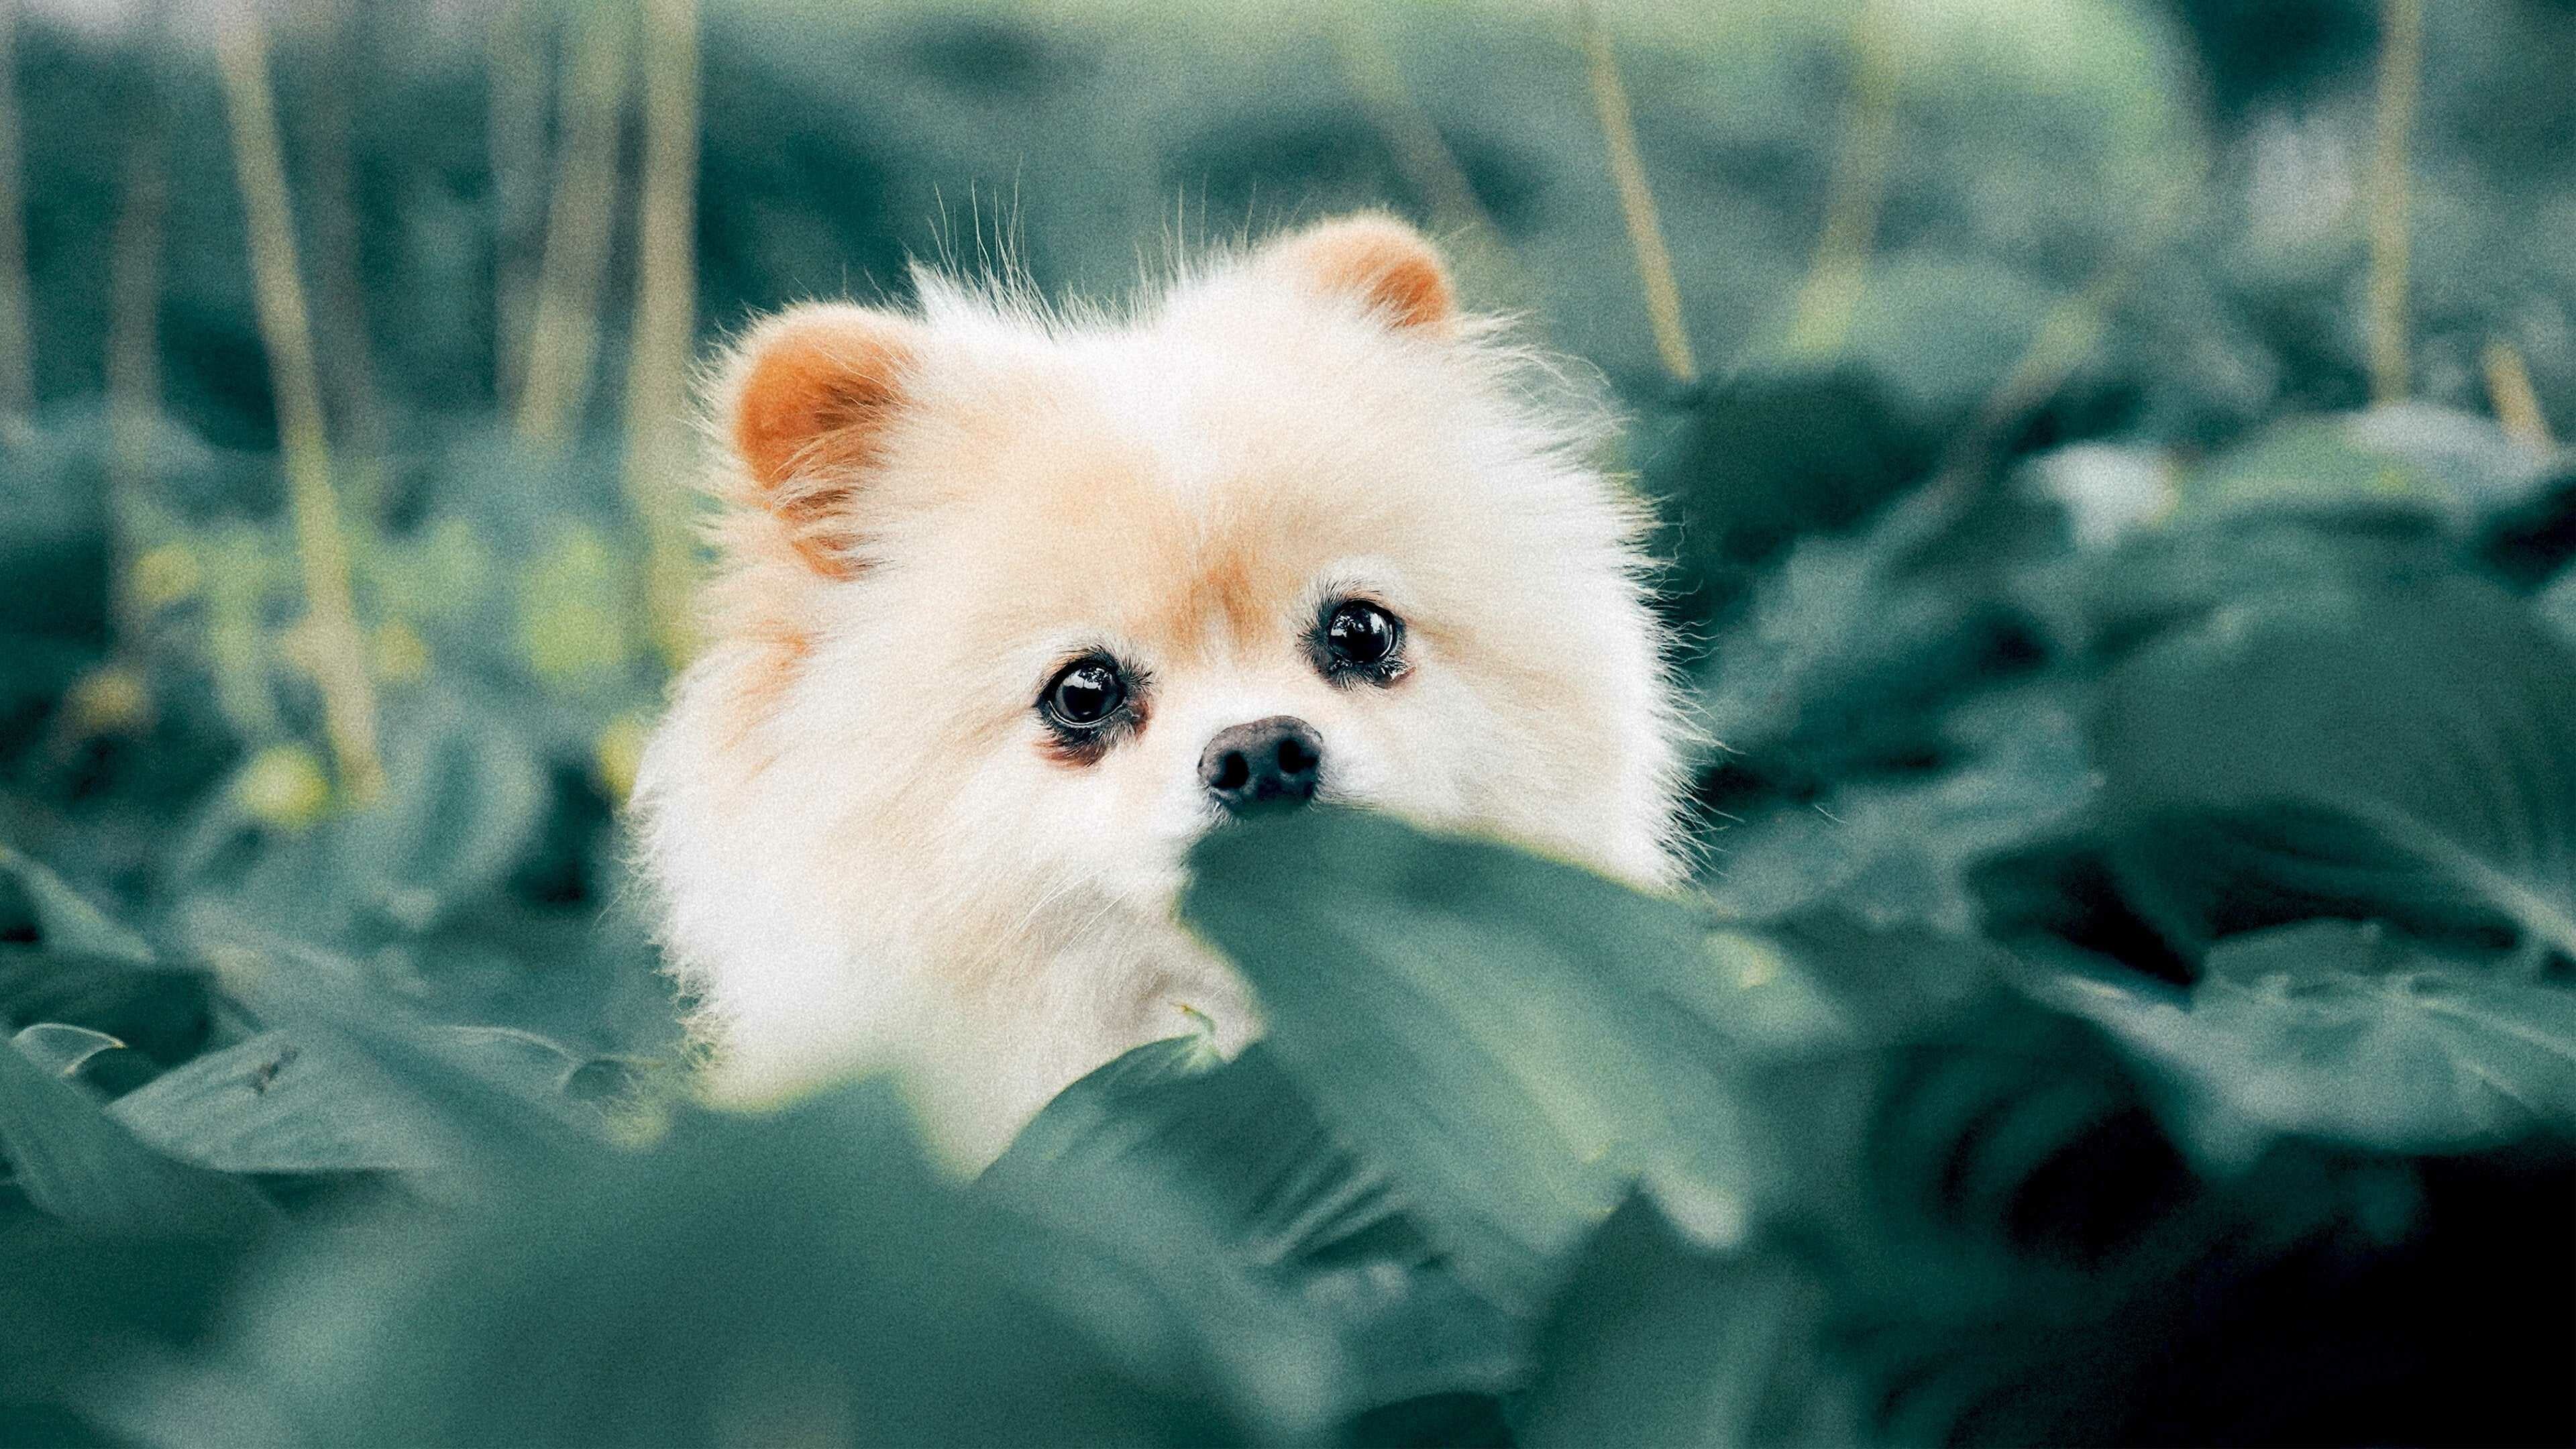 Puppy: Dog, Spitz, One of the first domesticated animals. 3840x2160 4K Wallpaper.